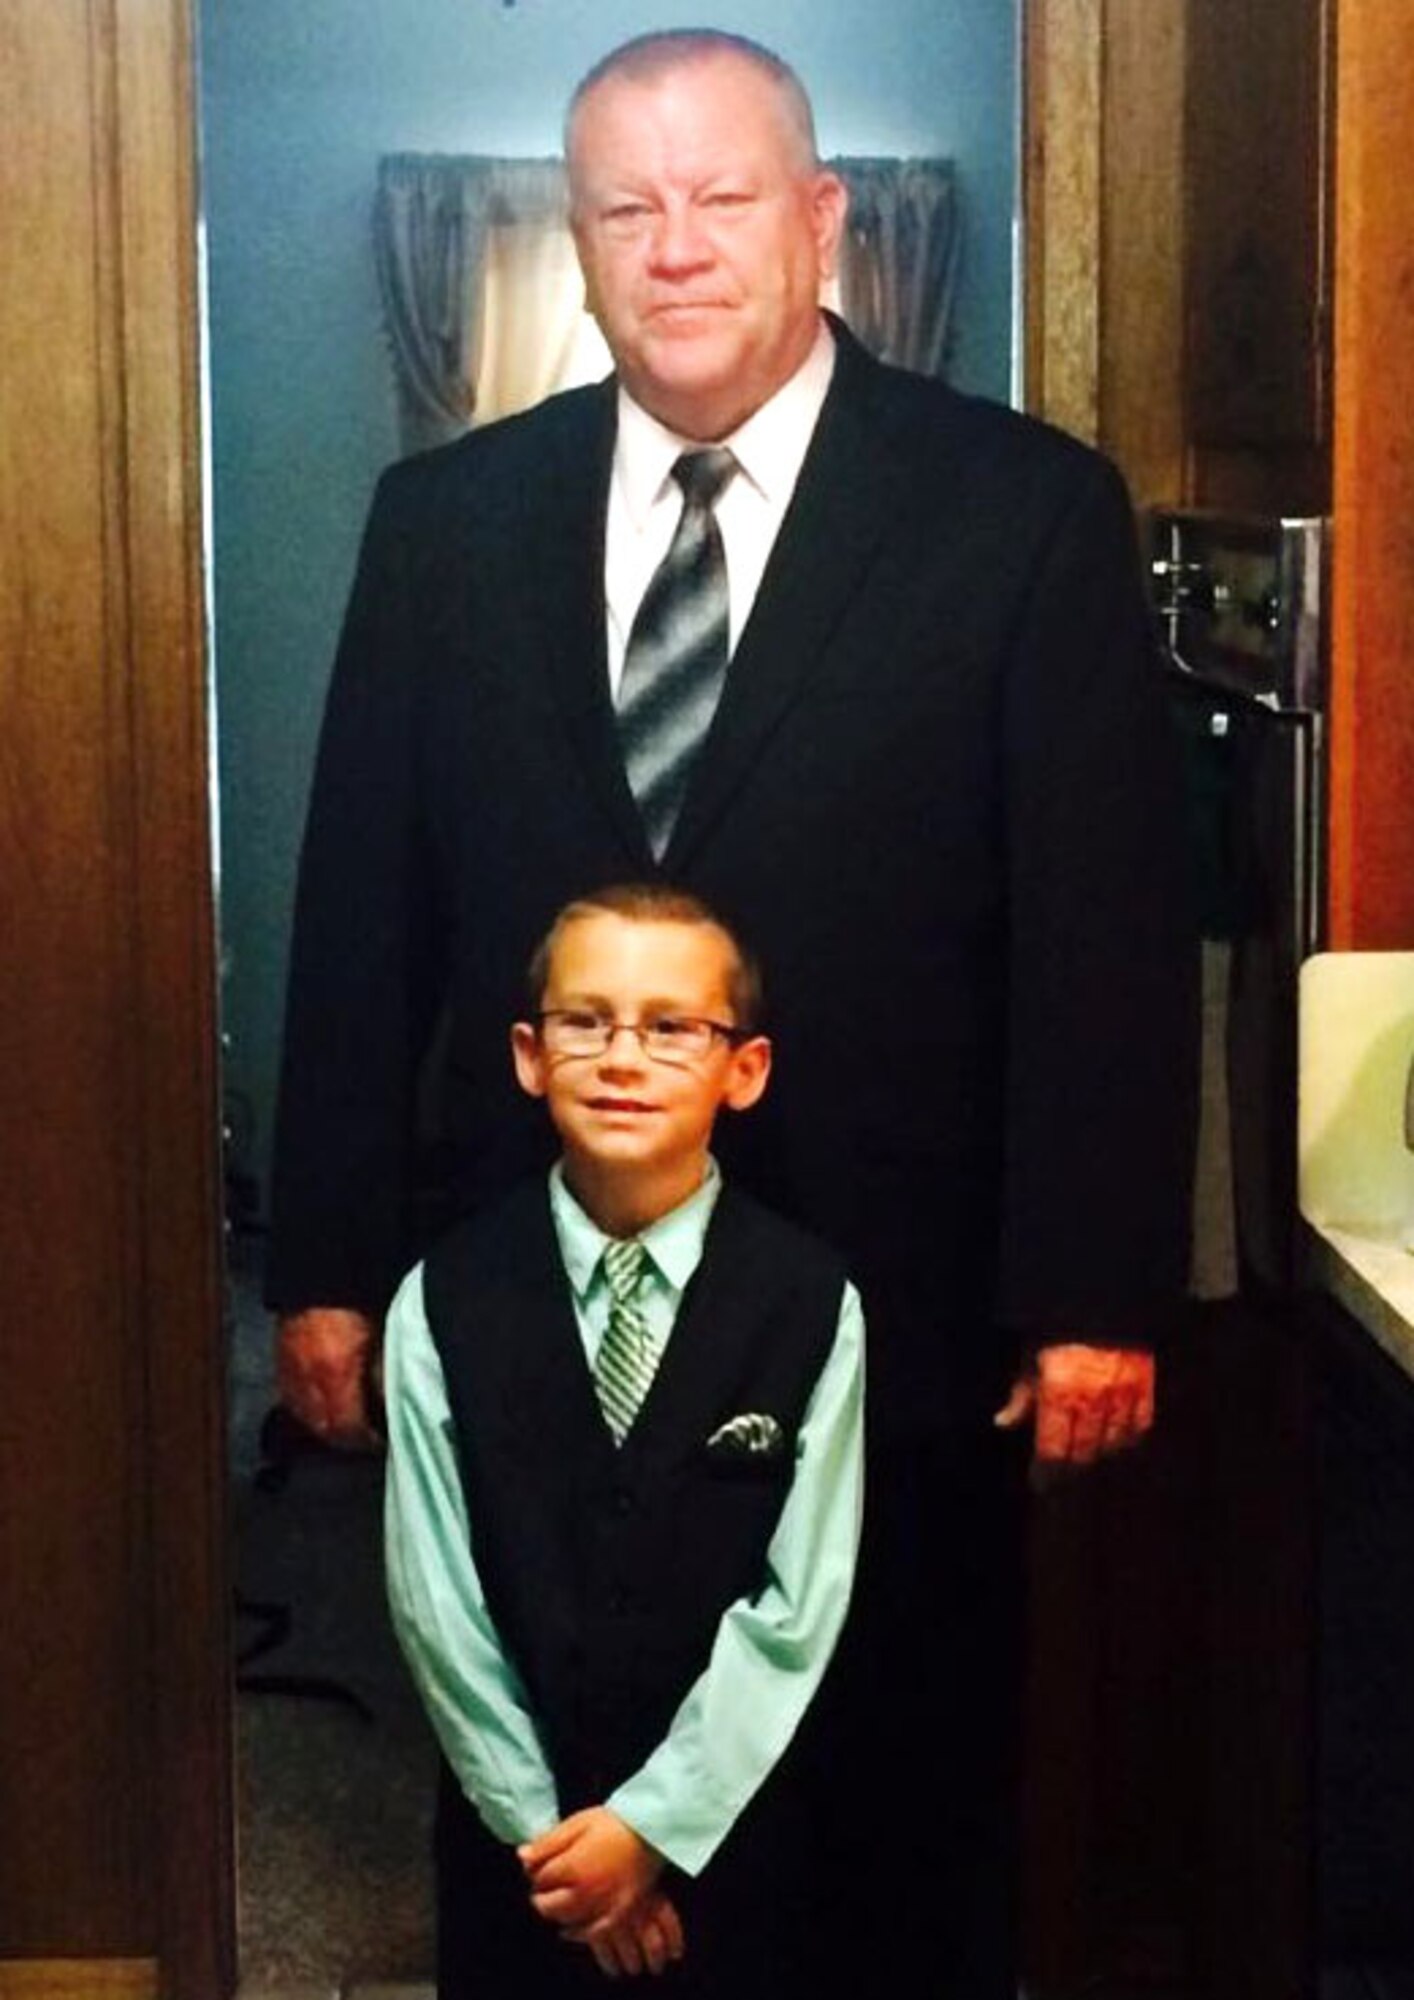 Ronald Hoelle with his grandson Austin. (Courtesy photo used with permission.)